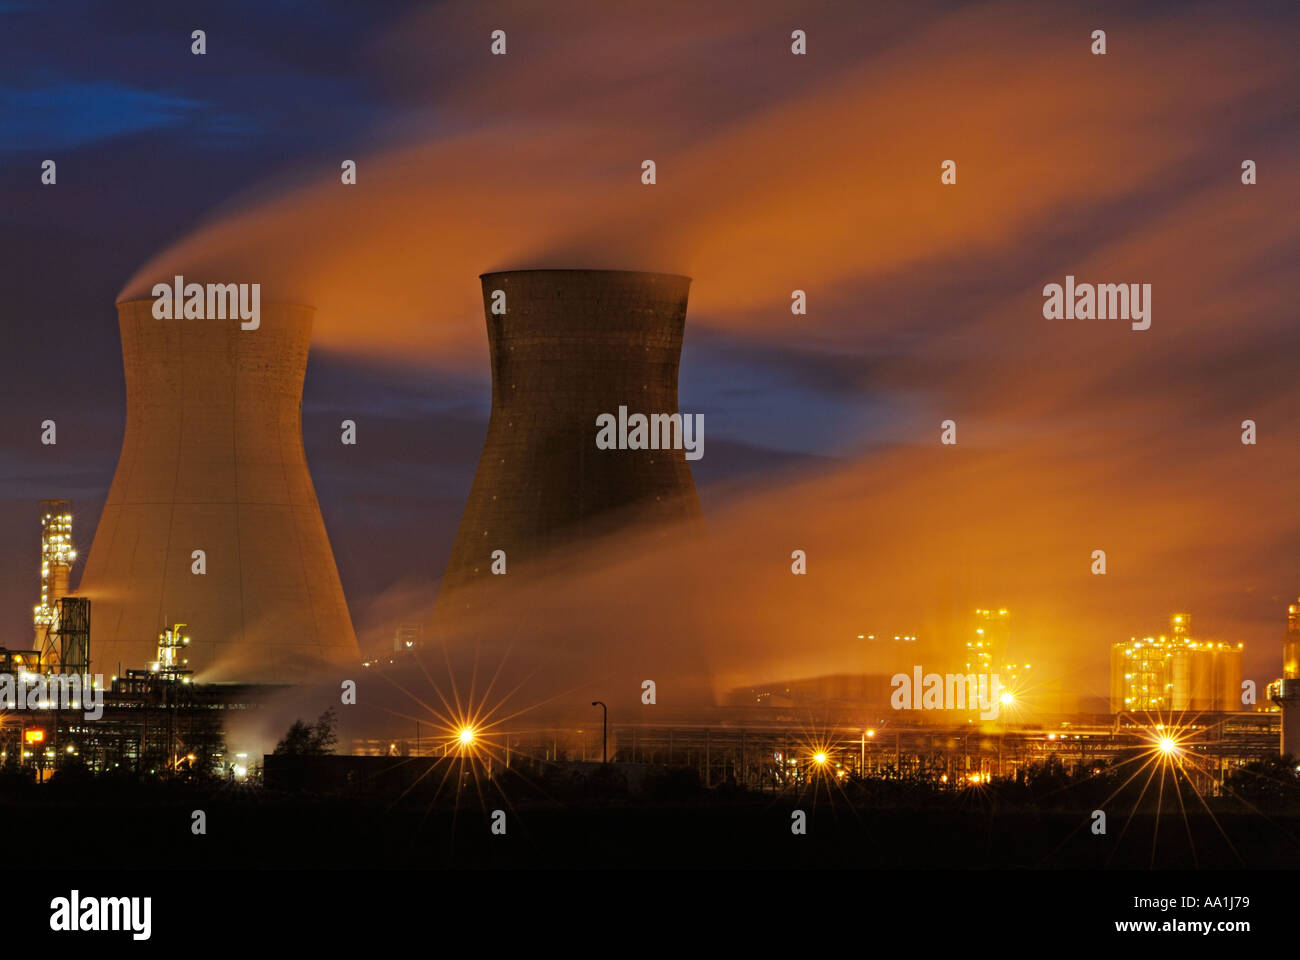 Two steaming cooling towers at night refinery at night Grangemouth Ineos petrochemical refinery Grangemouth Lothian Scotland UK GB Europe Stock Photo